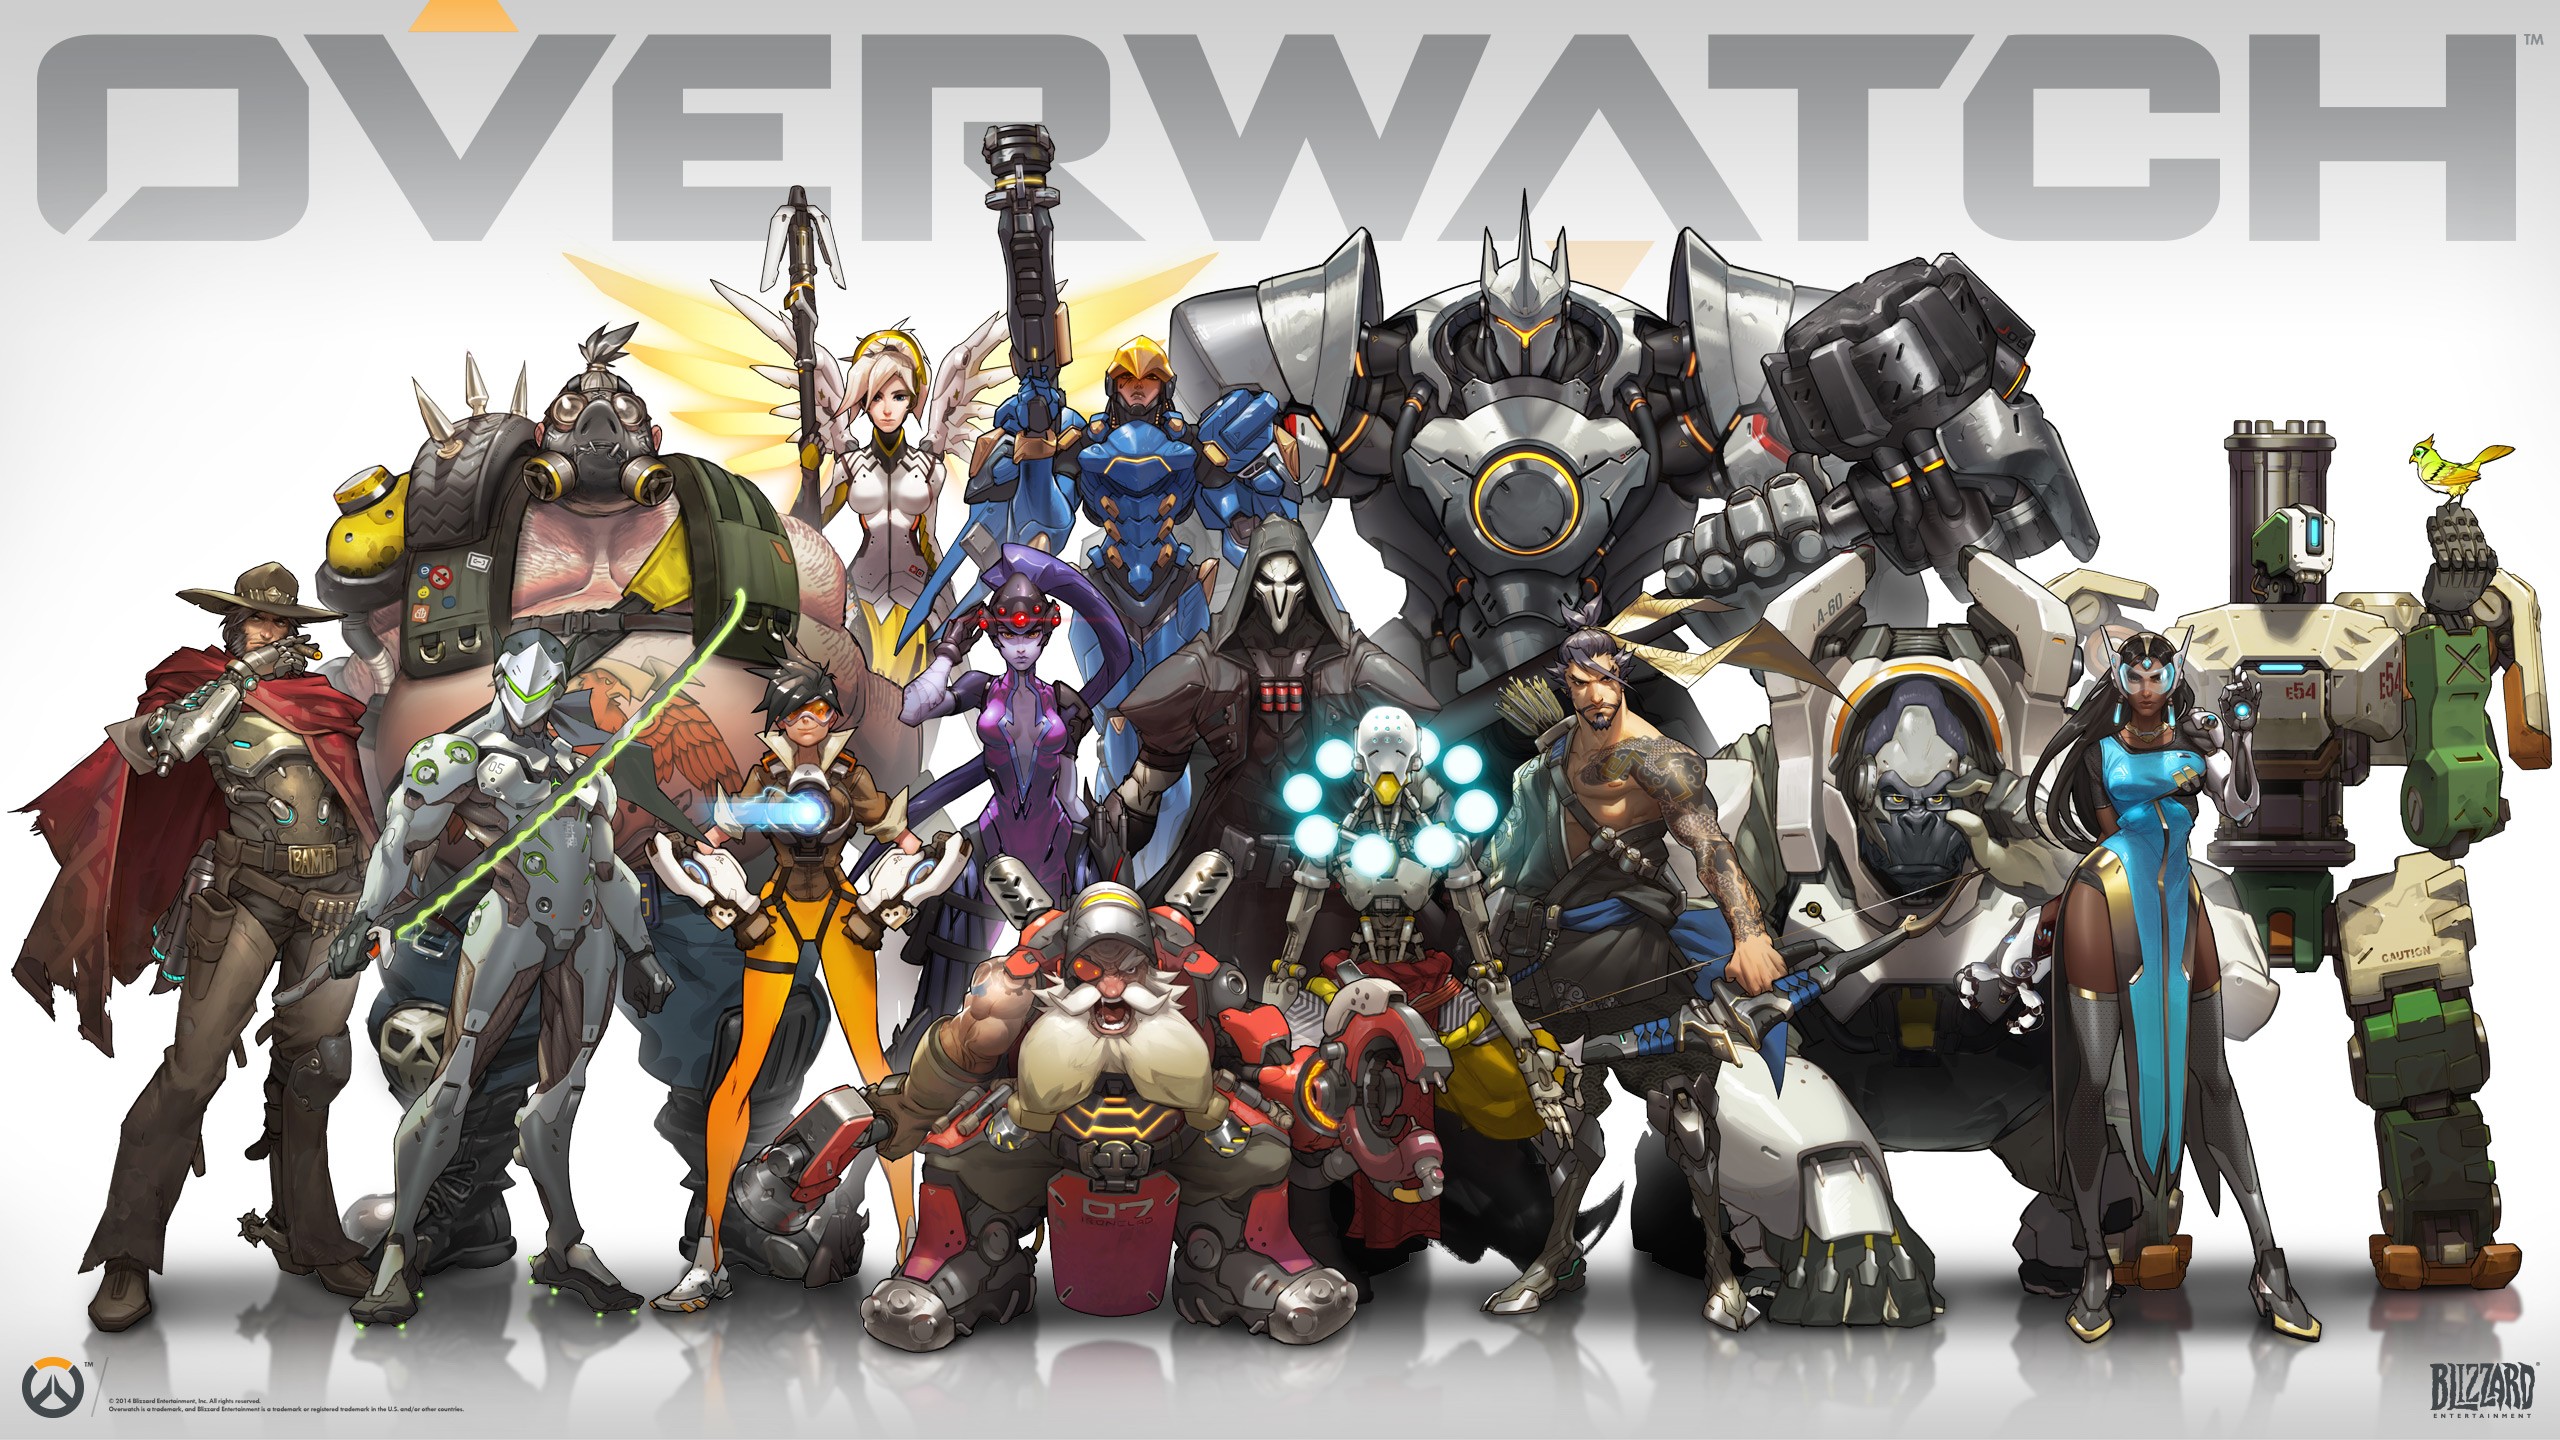 General 2560x1440 Overwatch Blizzard Entertainment D.Va (Overwatch) PC gaming video game art video game girls video game men video game characters